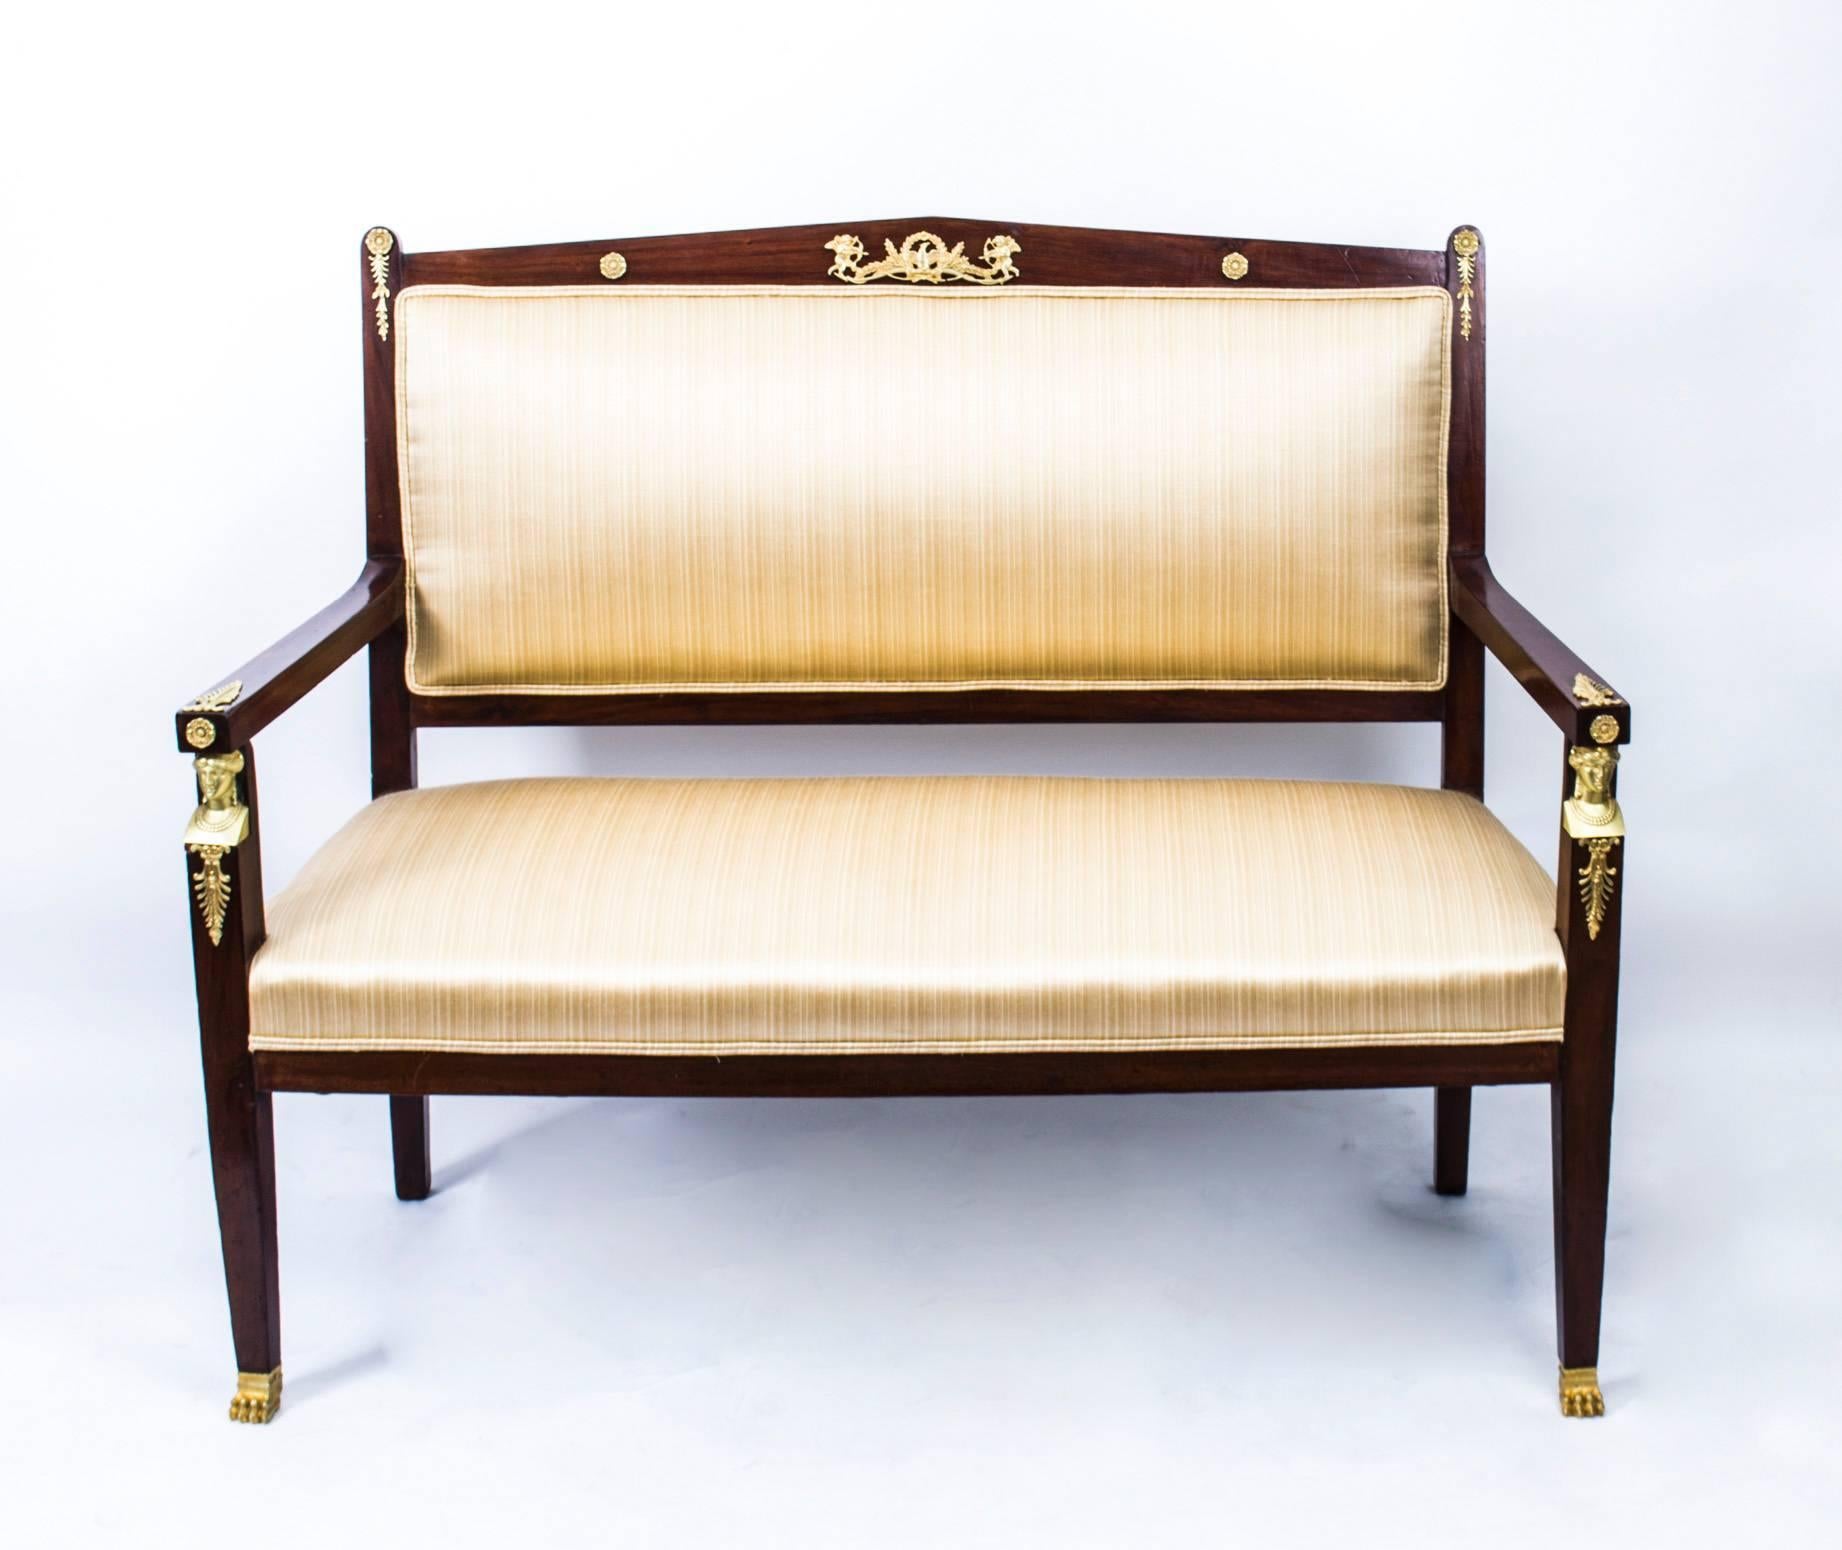 This is a fabulous and highly decorative antique French Empire three-piece salon suite, comprising a sofa and a pair of armchairs, circa 1880 in date.

It has been crafted from fabulous solid mahogany and is smothered in fabulous high quality ormolu